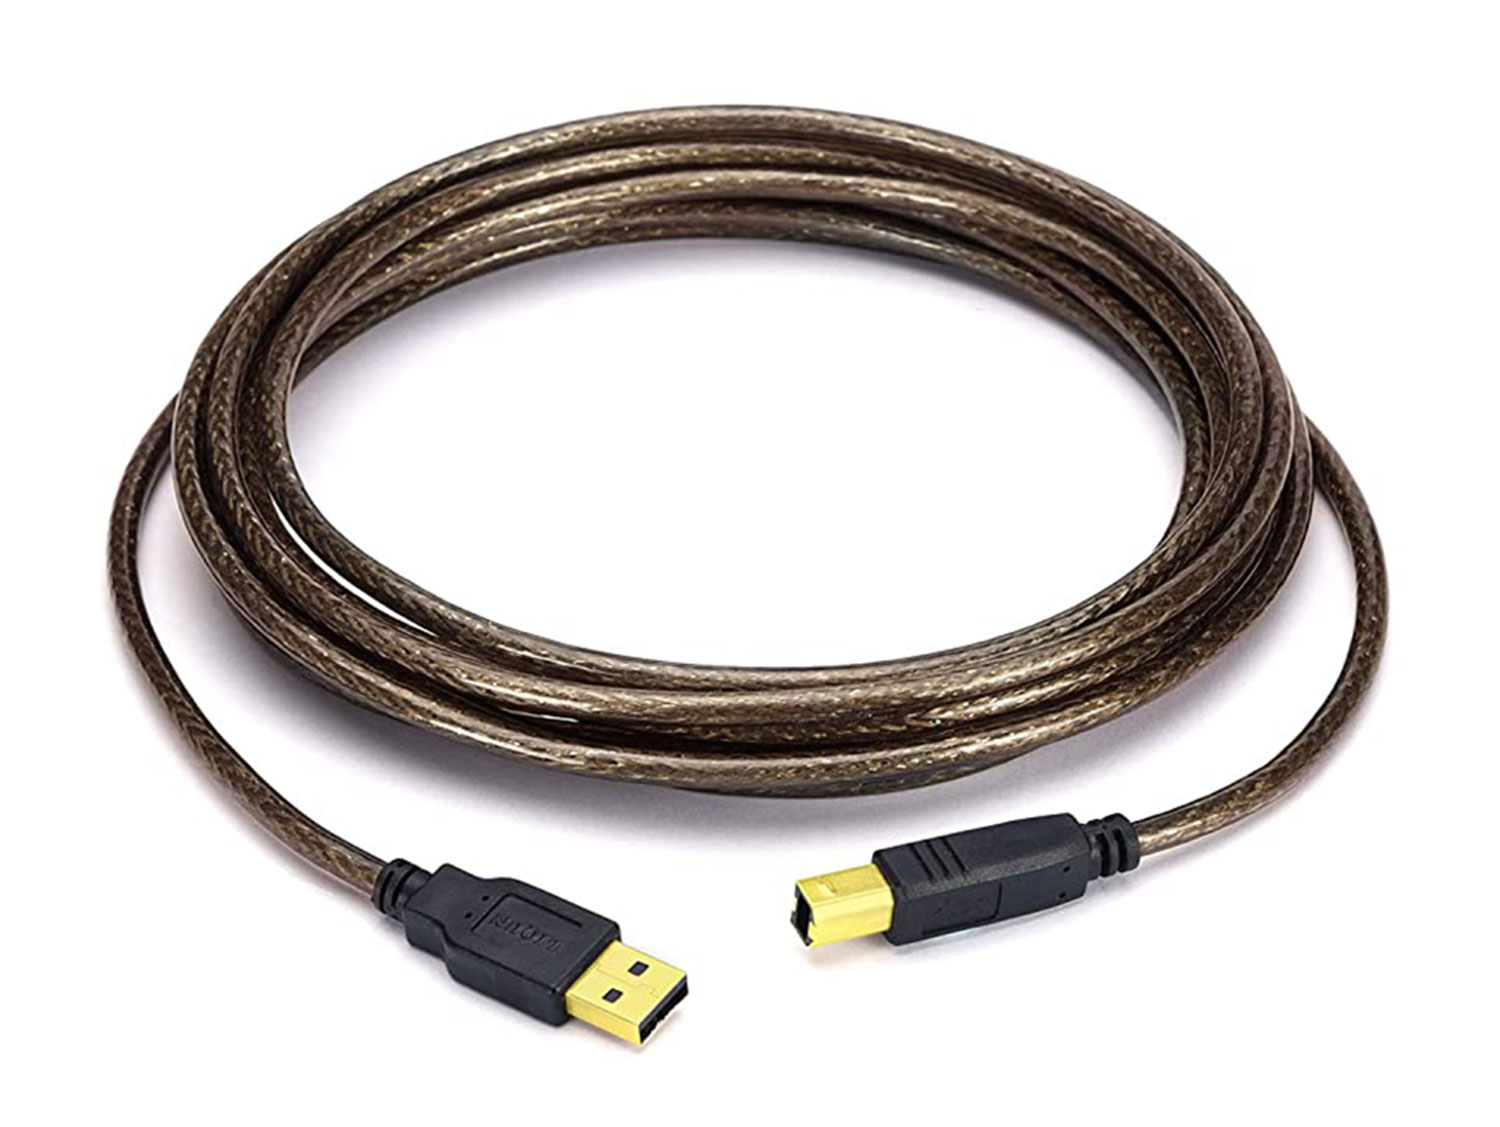 USB-A Male to USB-B Male Printer Cable